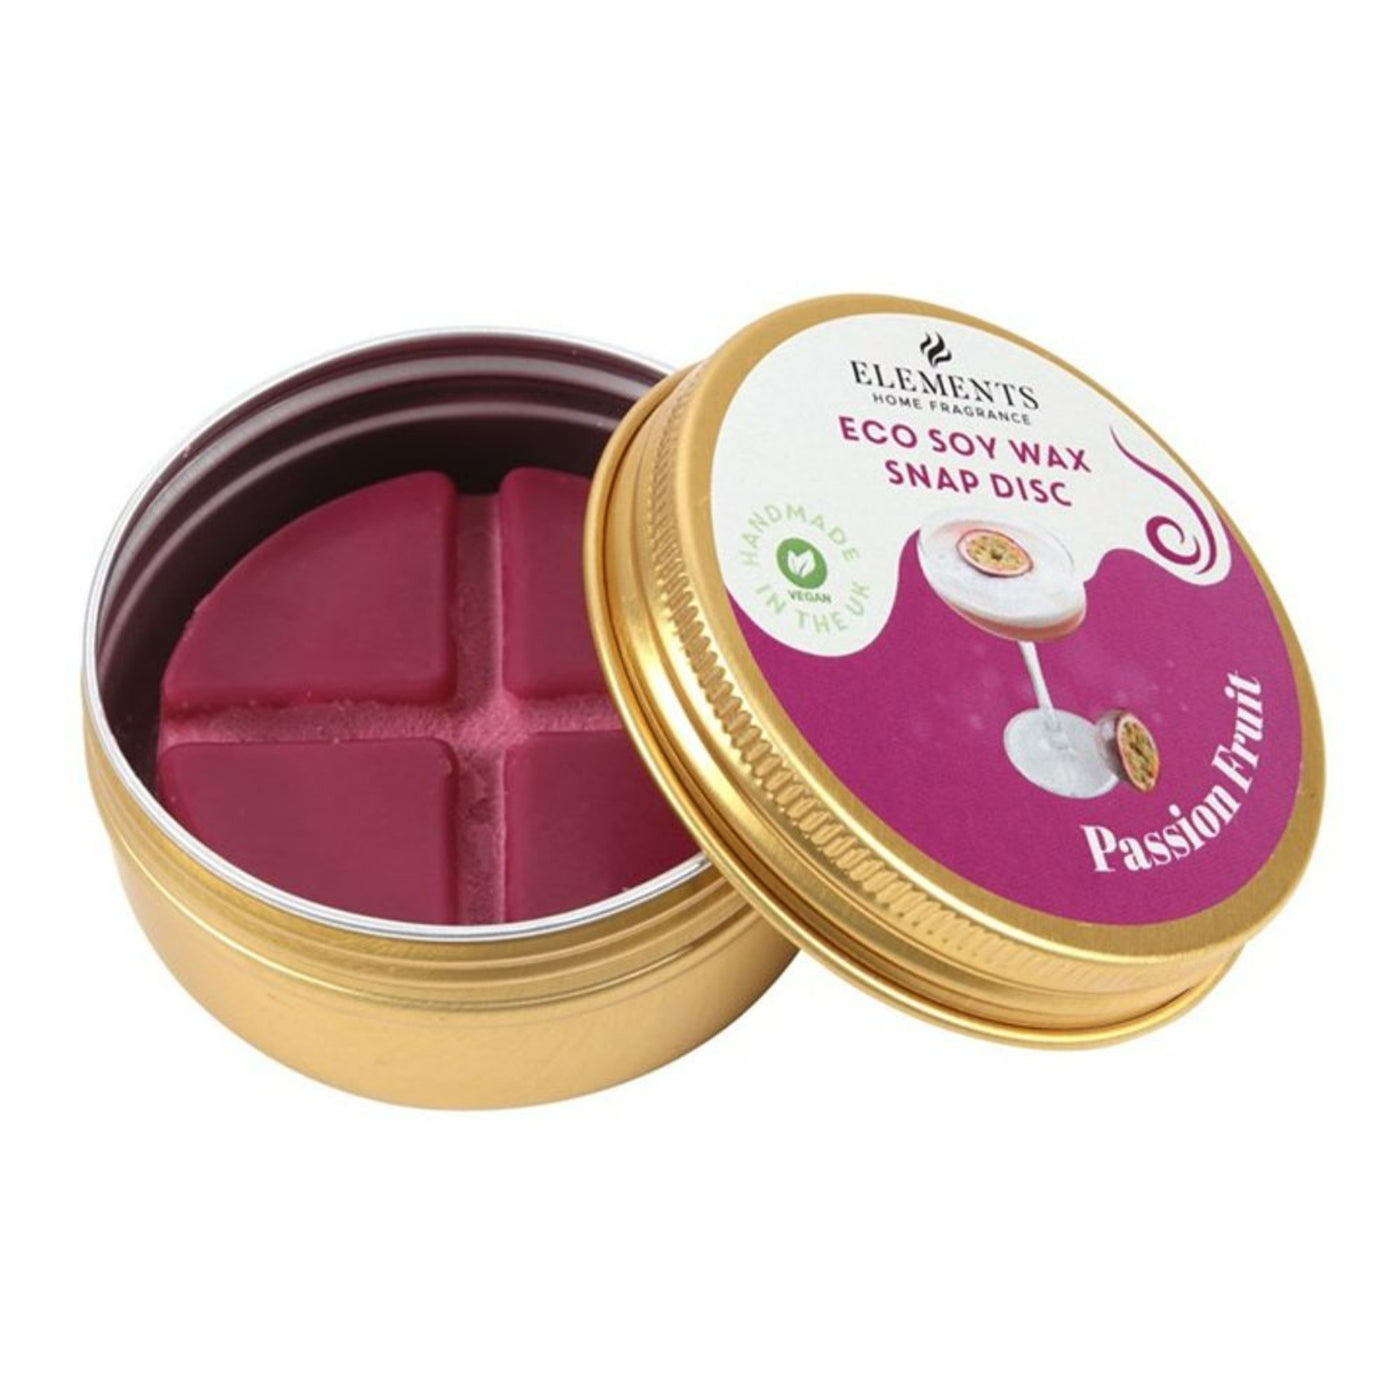 Passion Fruit Martini Soy Wax Snap Disc In Metal Tin.